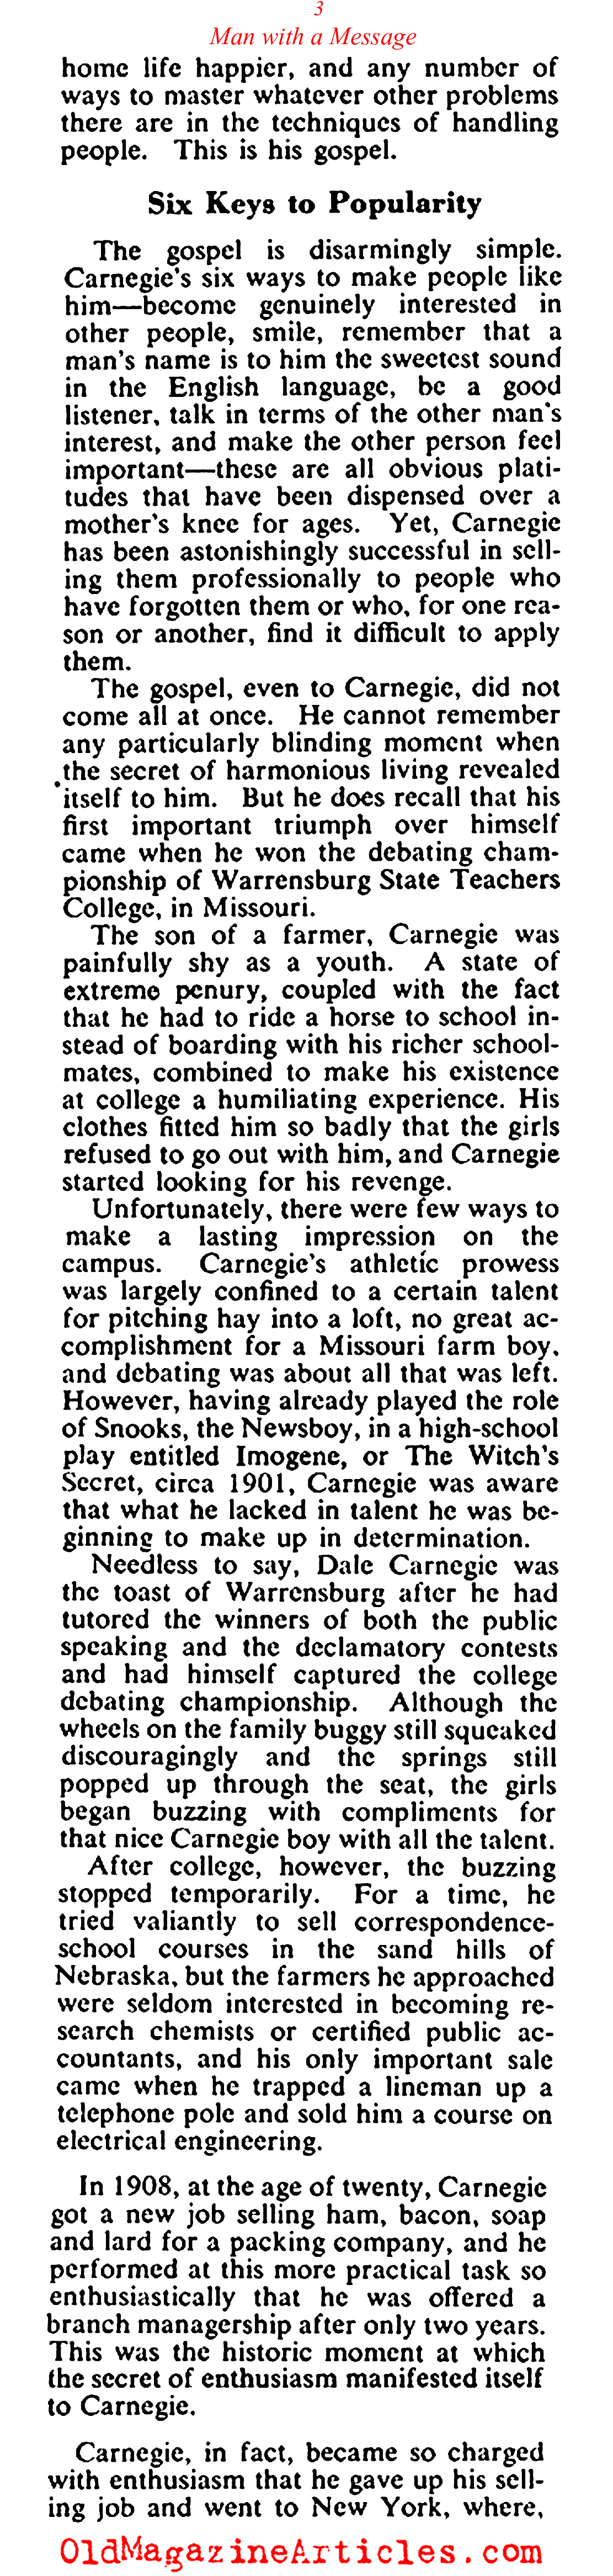 Dale Carnegie on Winning Friends and Influencing People (Collier's Magazine, 1949)